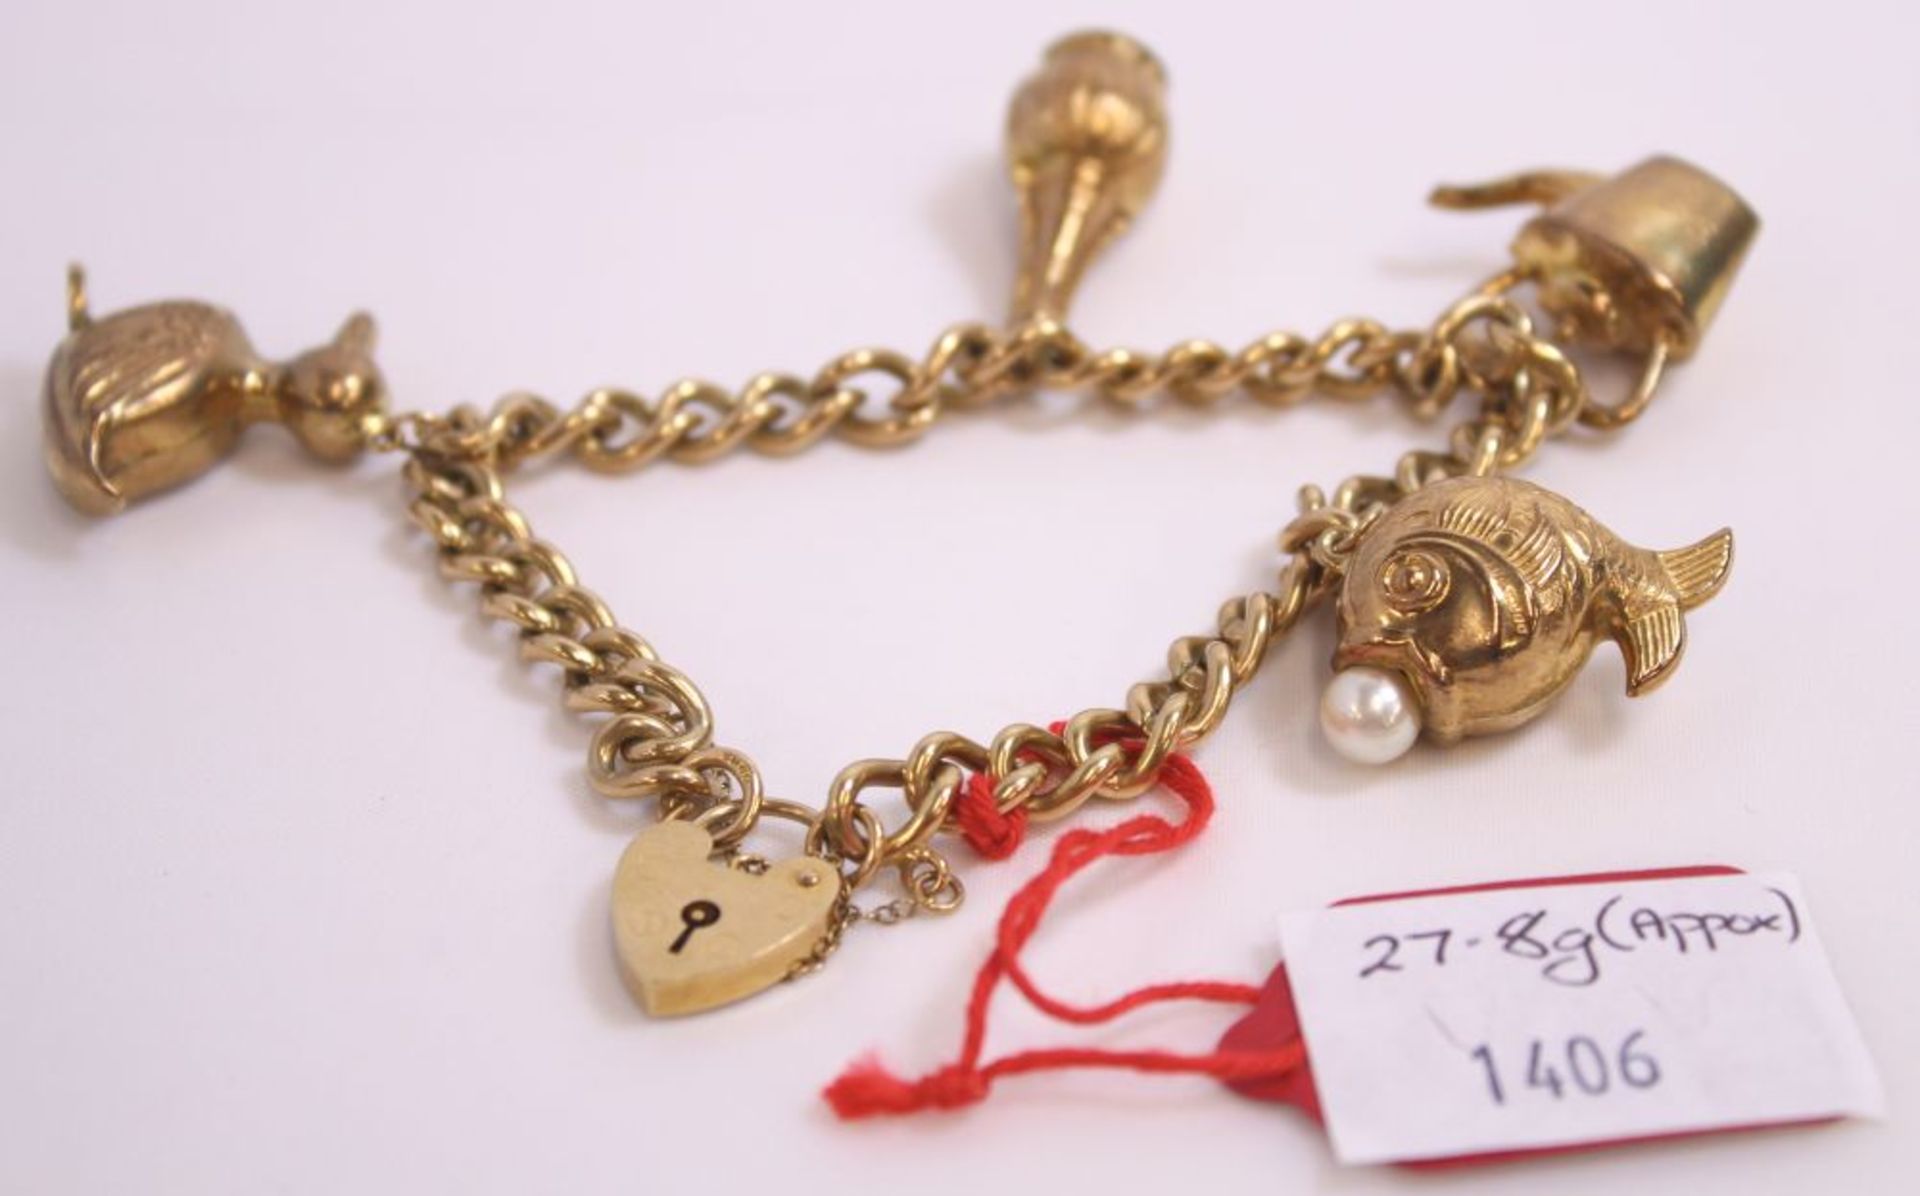 9ct Gold Charm Bracelet with Five 9ct Gold Charms (one with pearl?) 27.8g (Est. £300-£400)